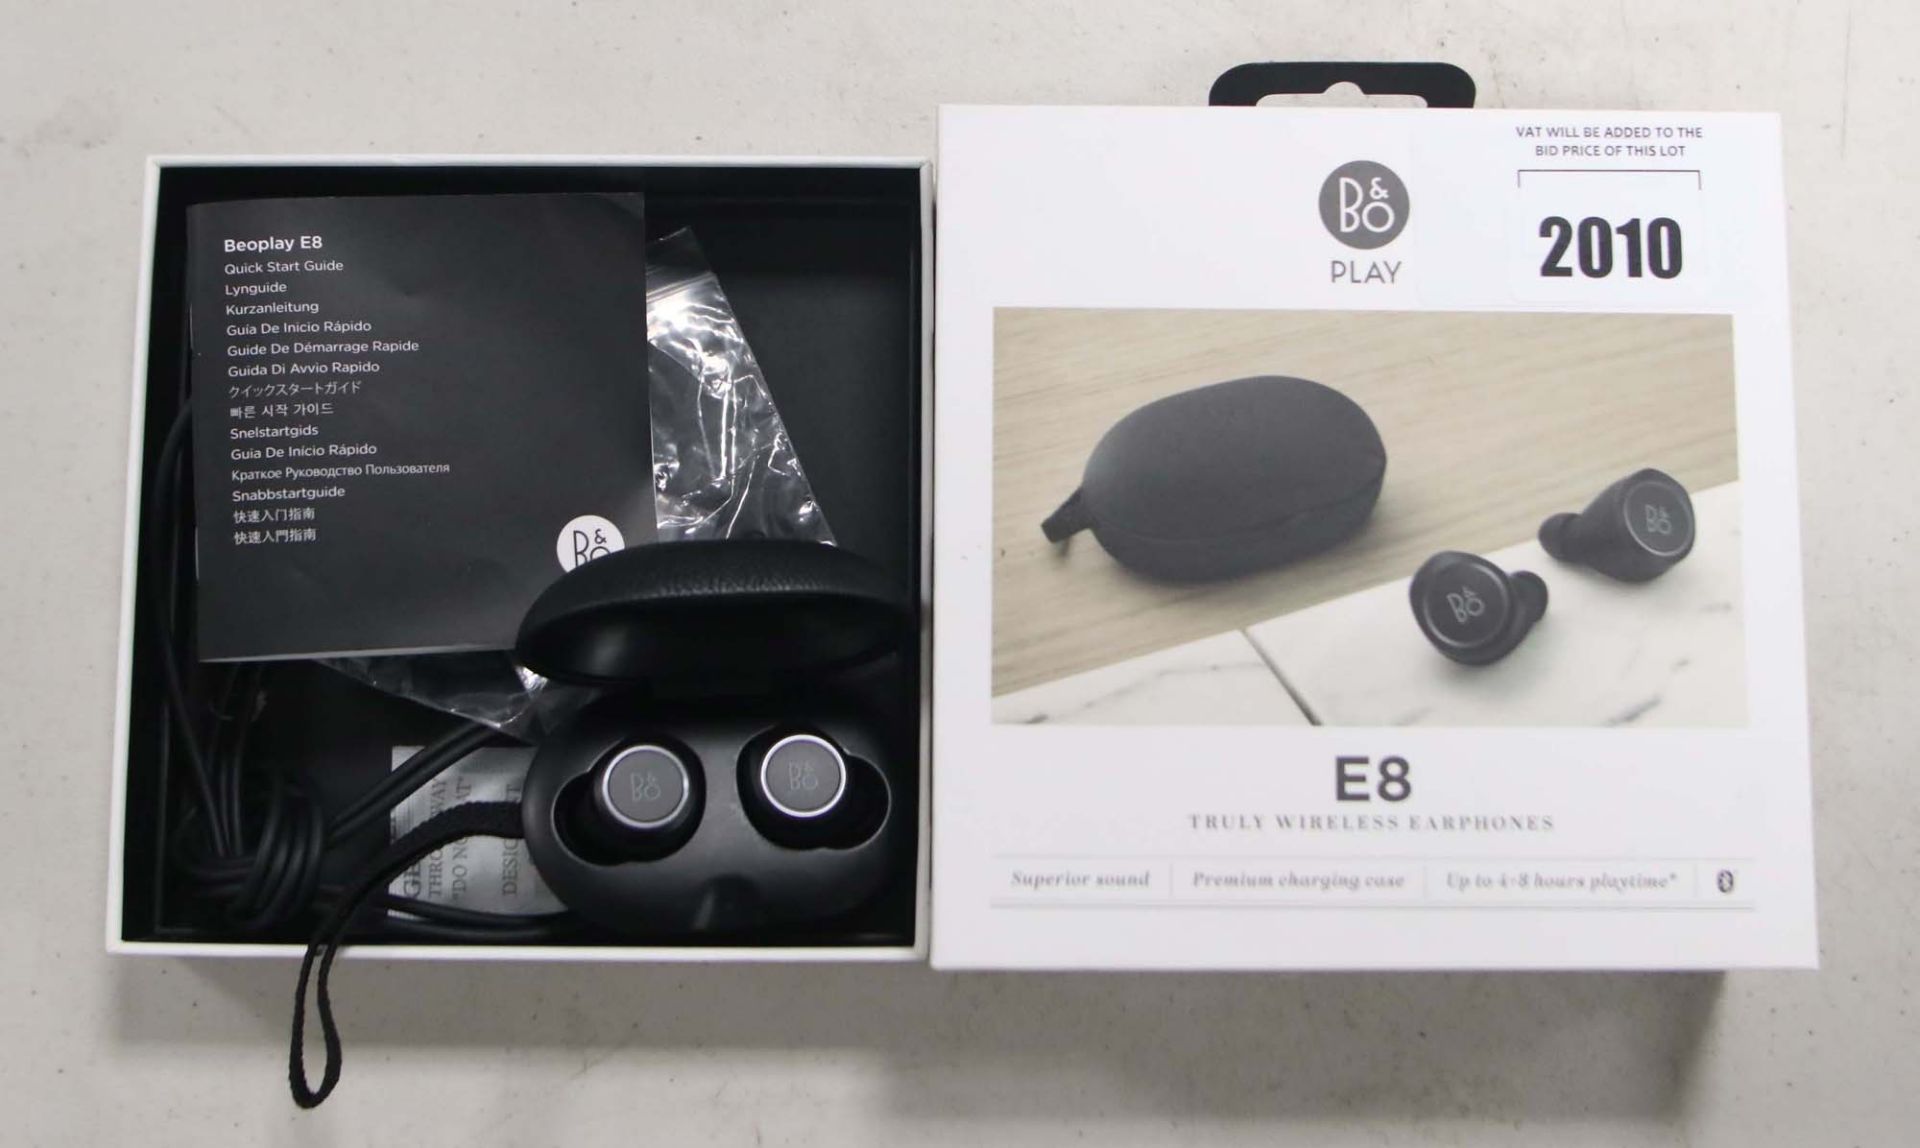 Bang & Olufsen E8 wireless earphones with charging case and box